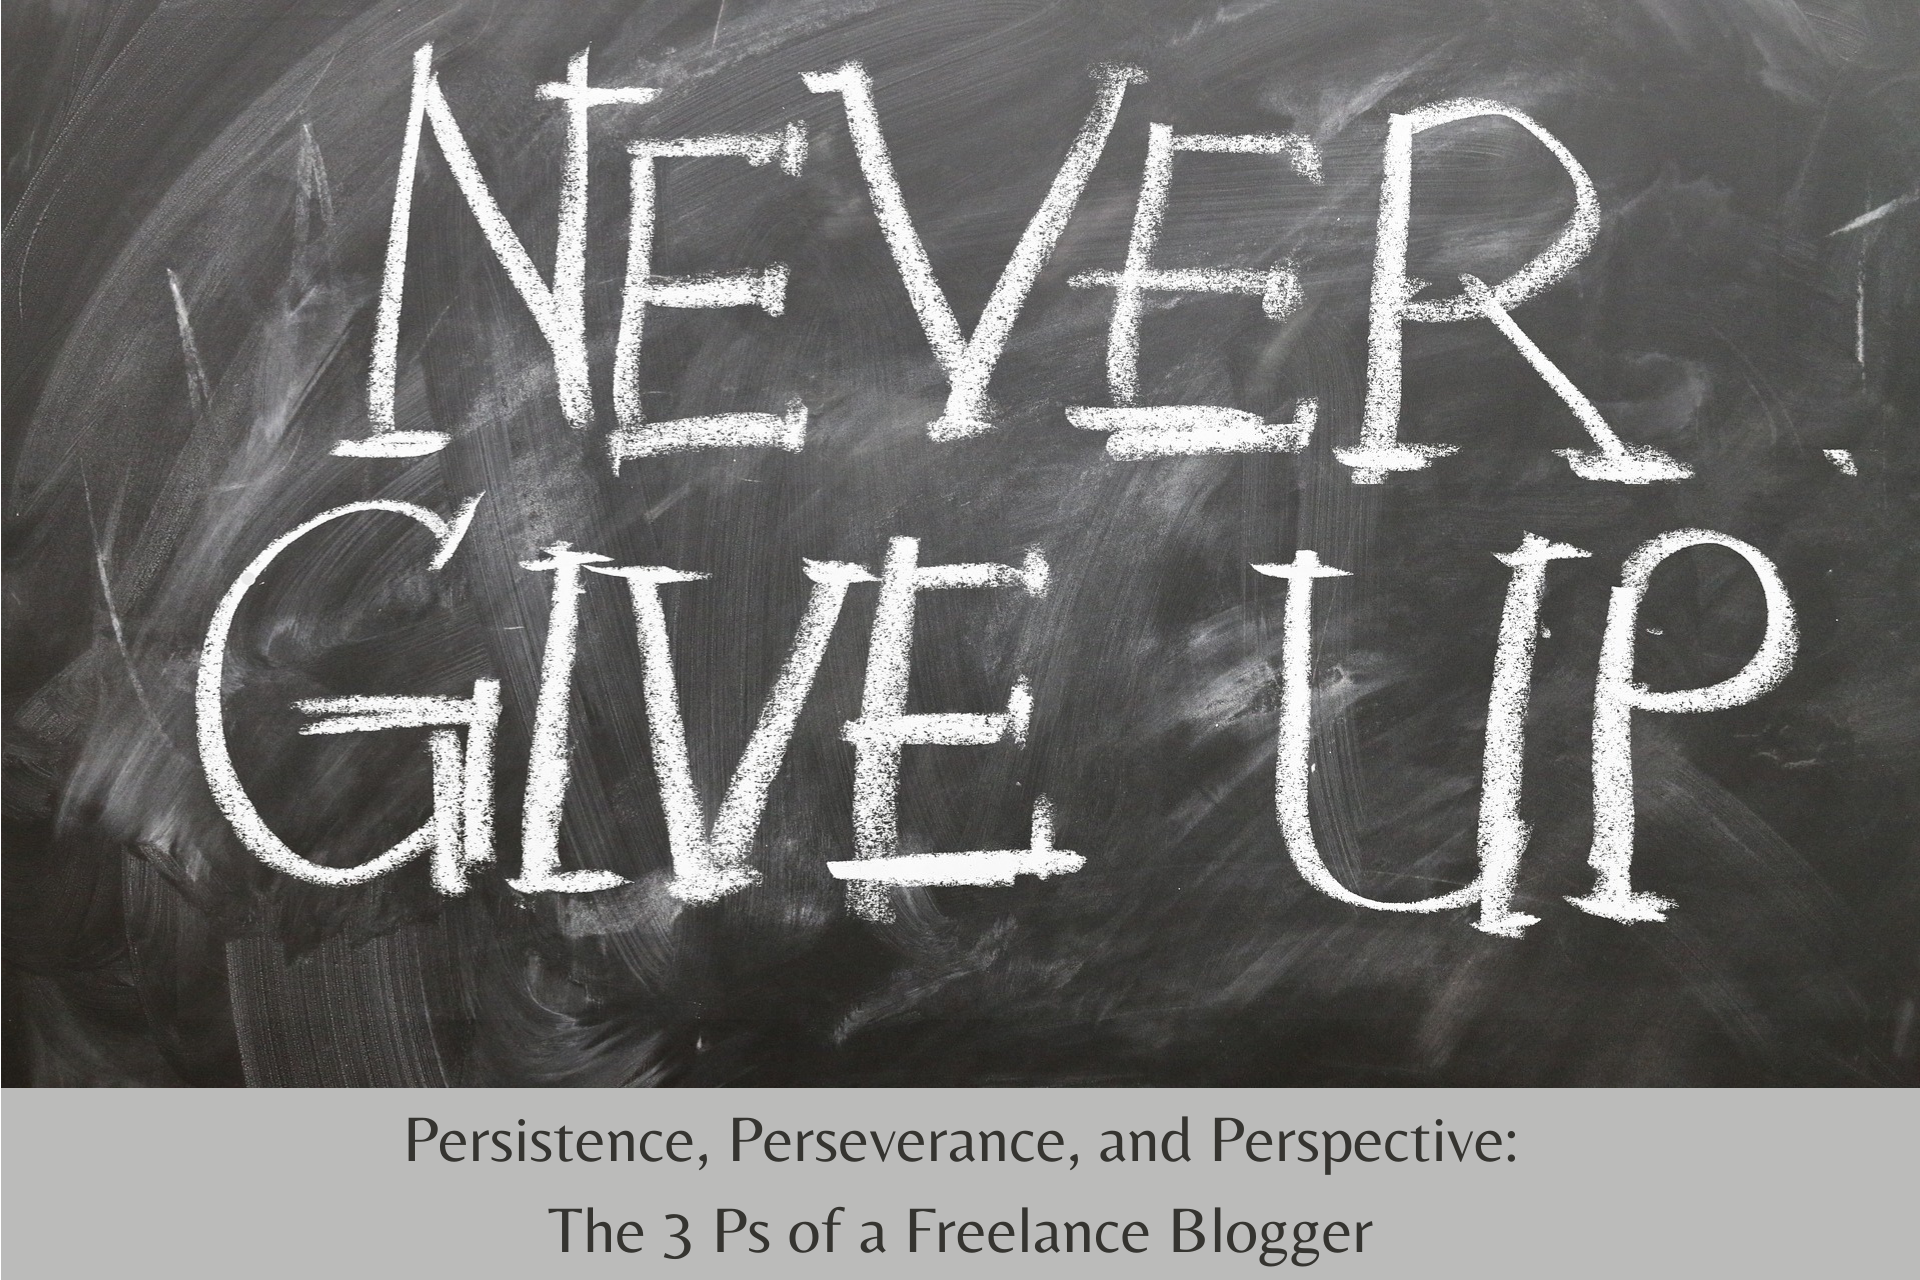 Perseverance vs. Persistence: Why You Need Both as a Freelance Blogger